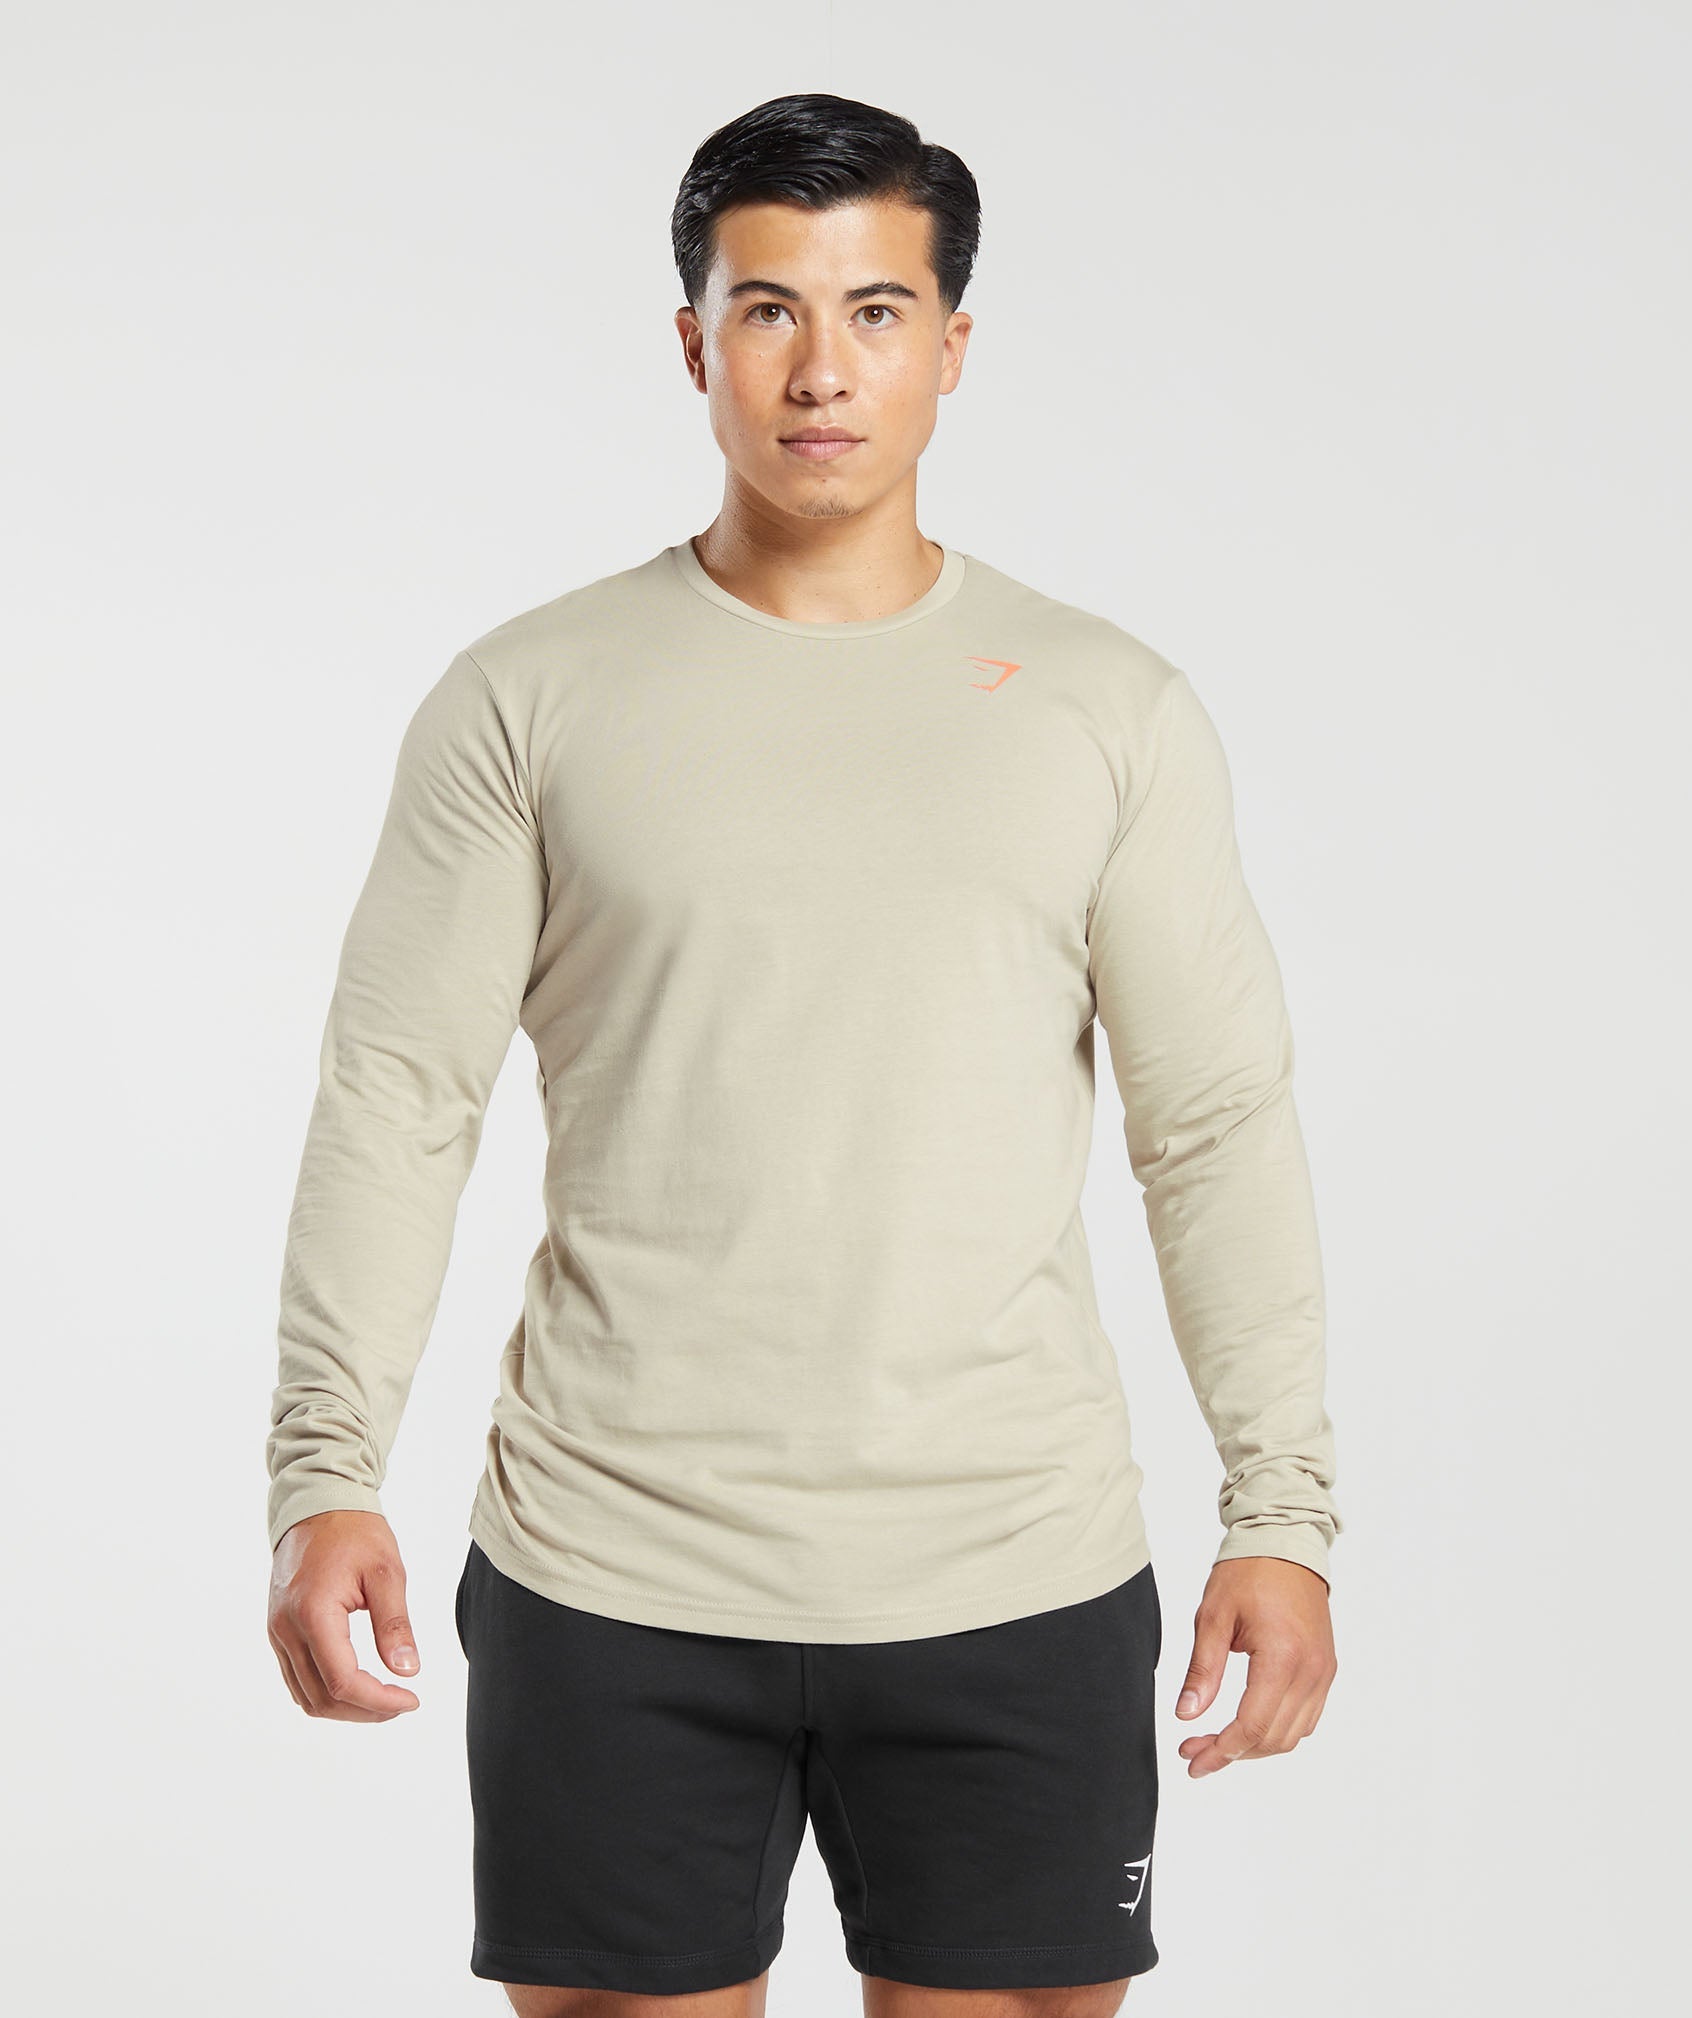 Lifting Club Long Sleeve T-Shirt in Washed Stone Brown - view 2